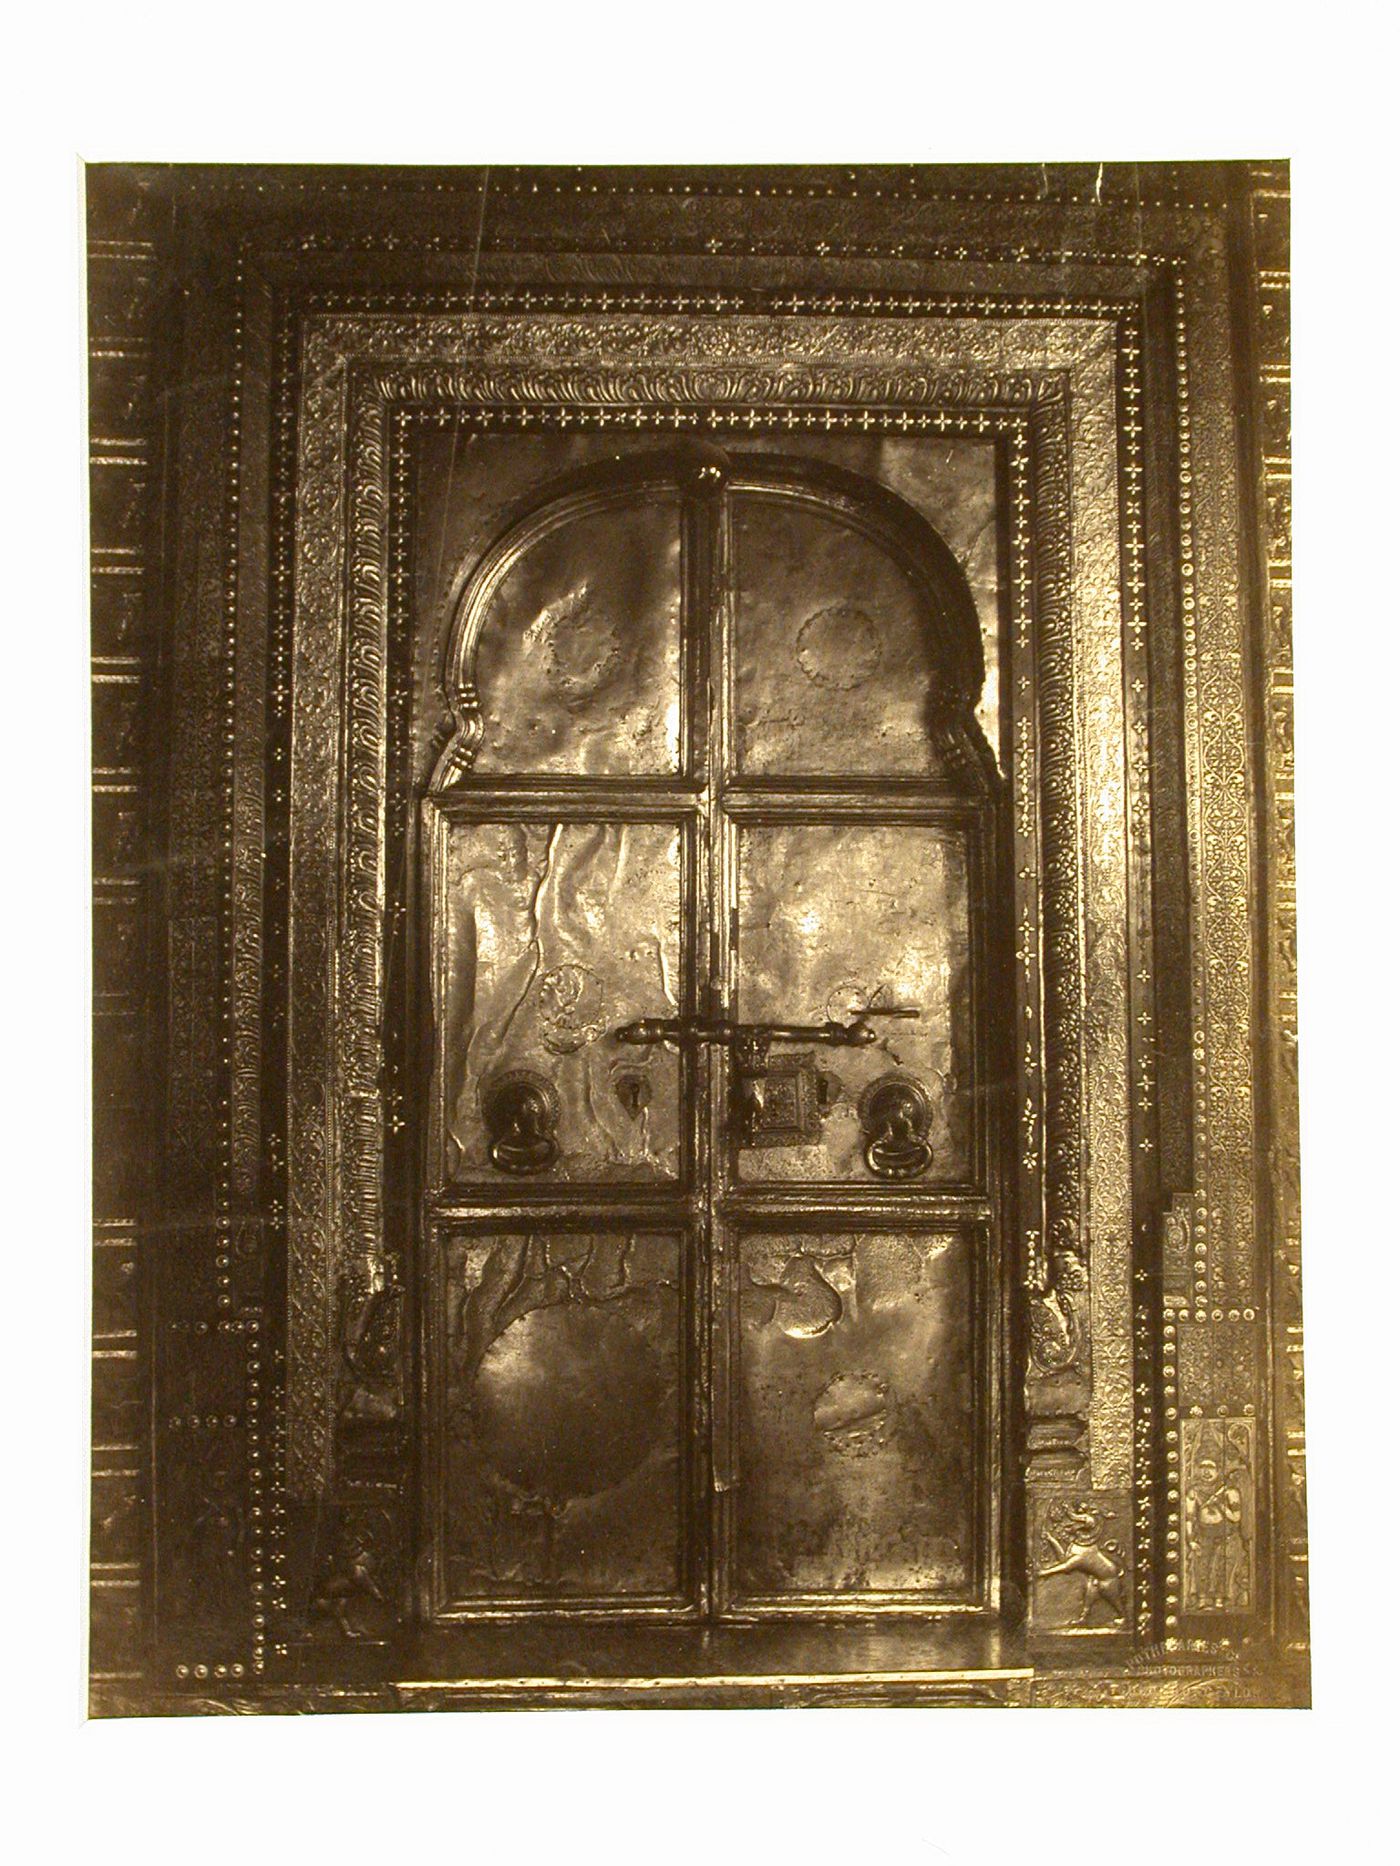 View of temple doors, possibly at the Temple of the Tooth (also known as the Sri Dalada Maligawa), Kandy, Ceylon (now Sri Lanka)